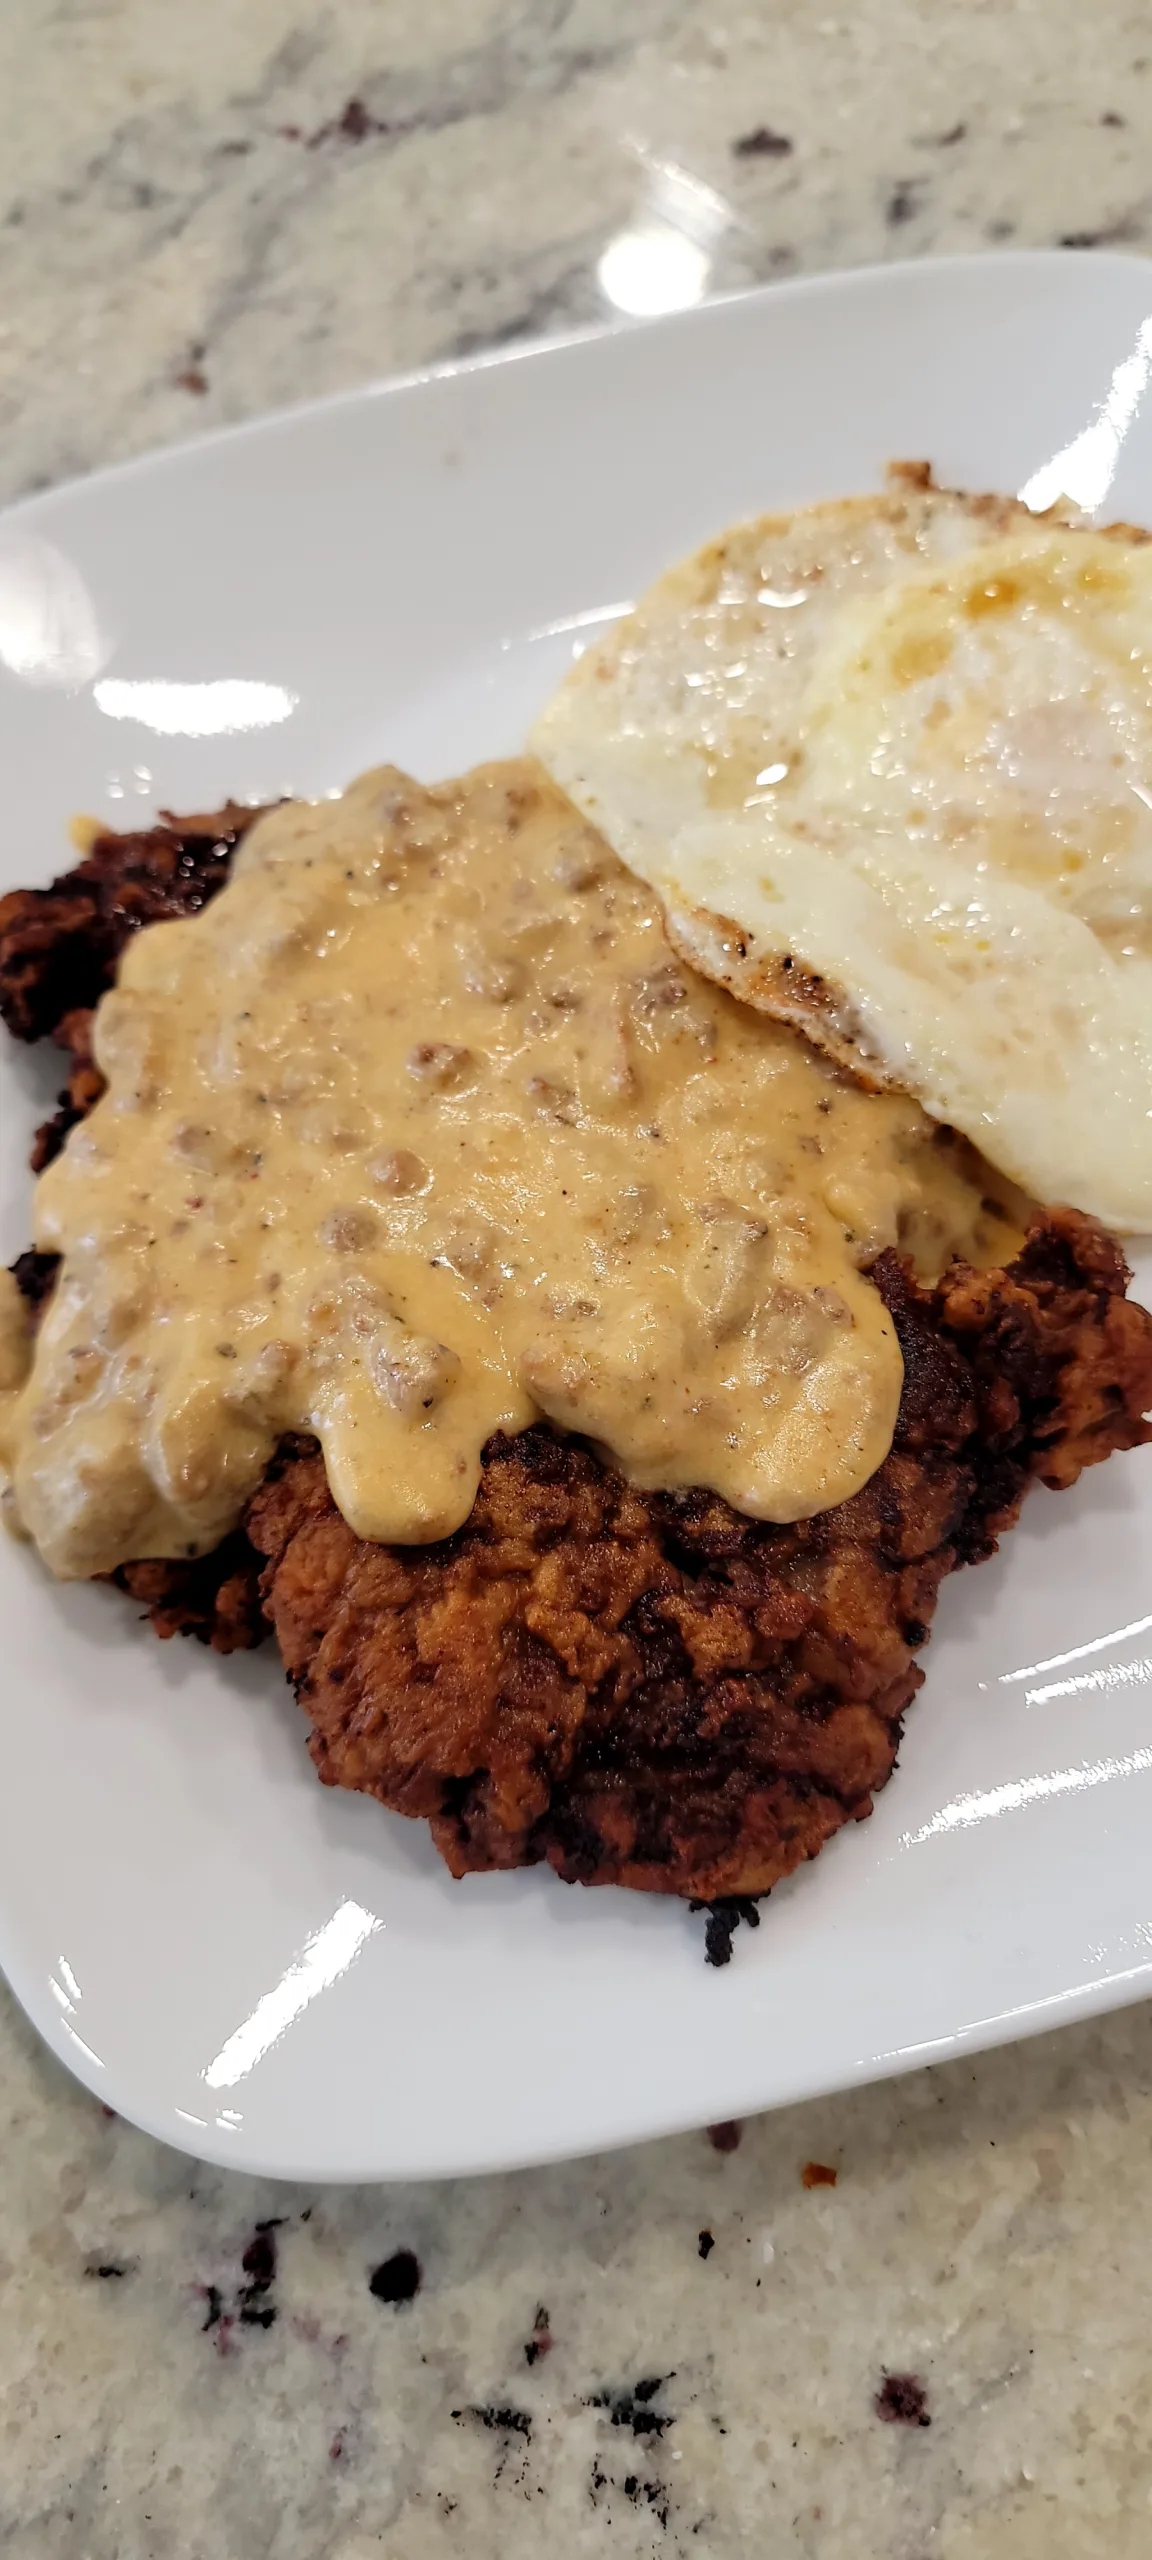 Chicken Fried Steak with Chorizo Sausage Gravy and Fried Eggs